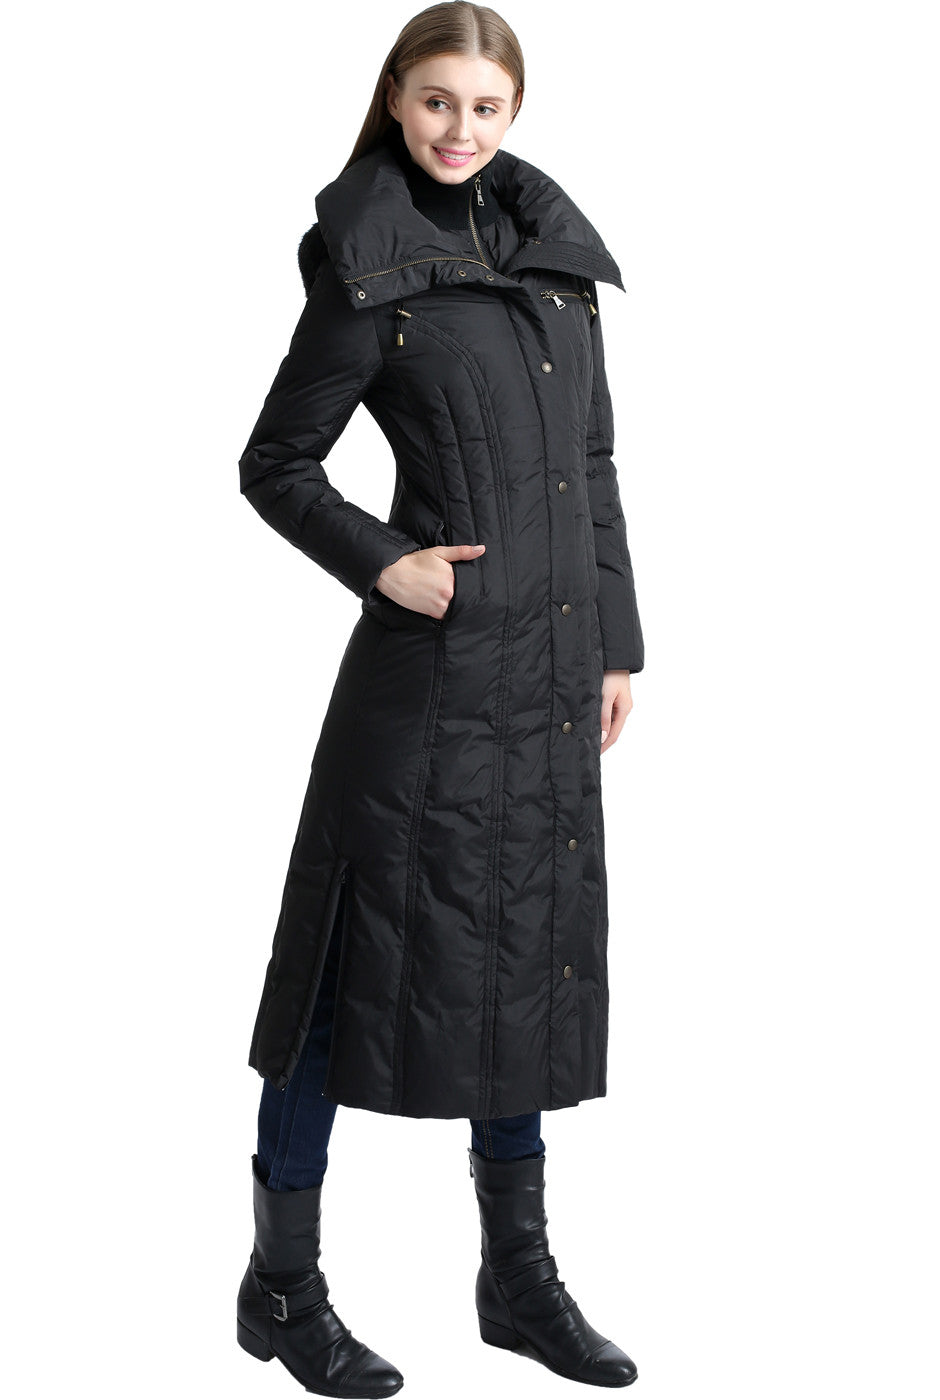 bgsd womens lacey water resistant hooded long down puffer coat